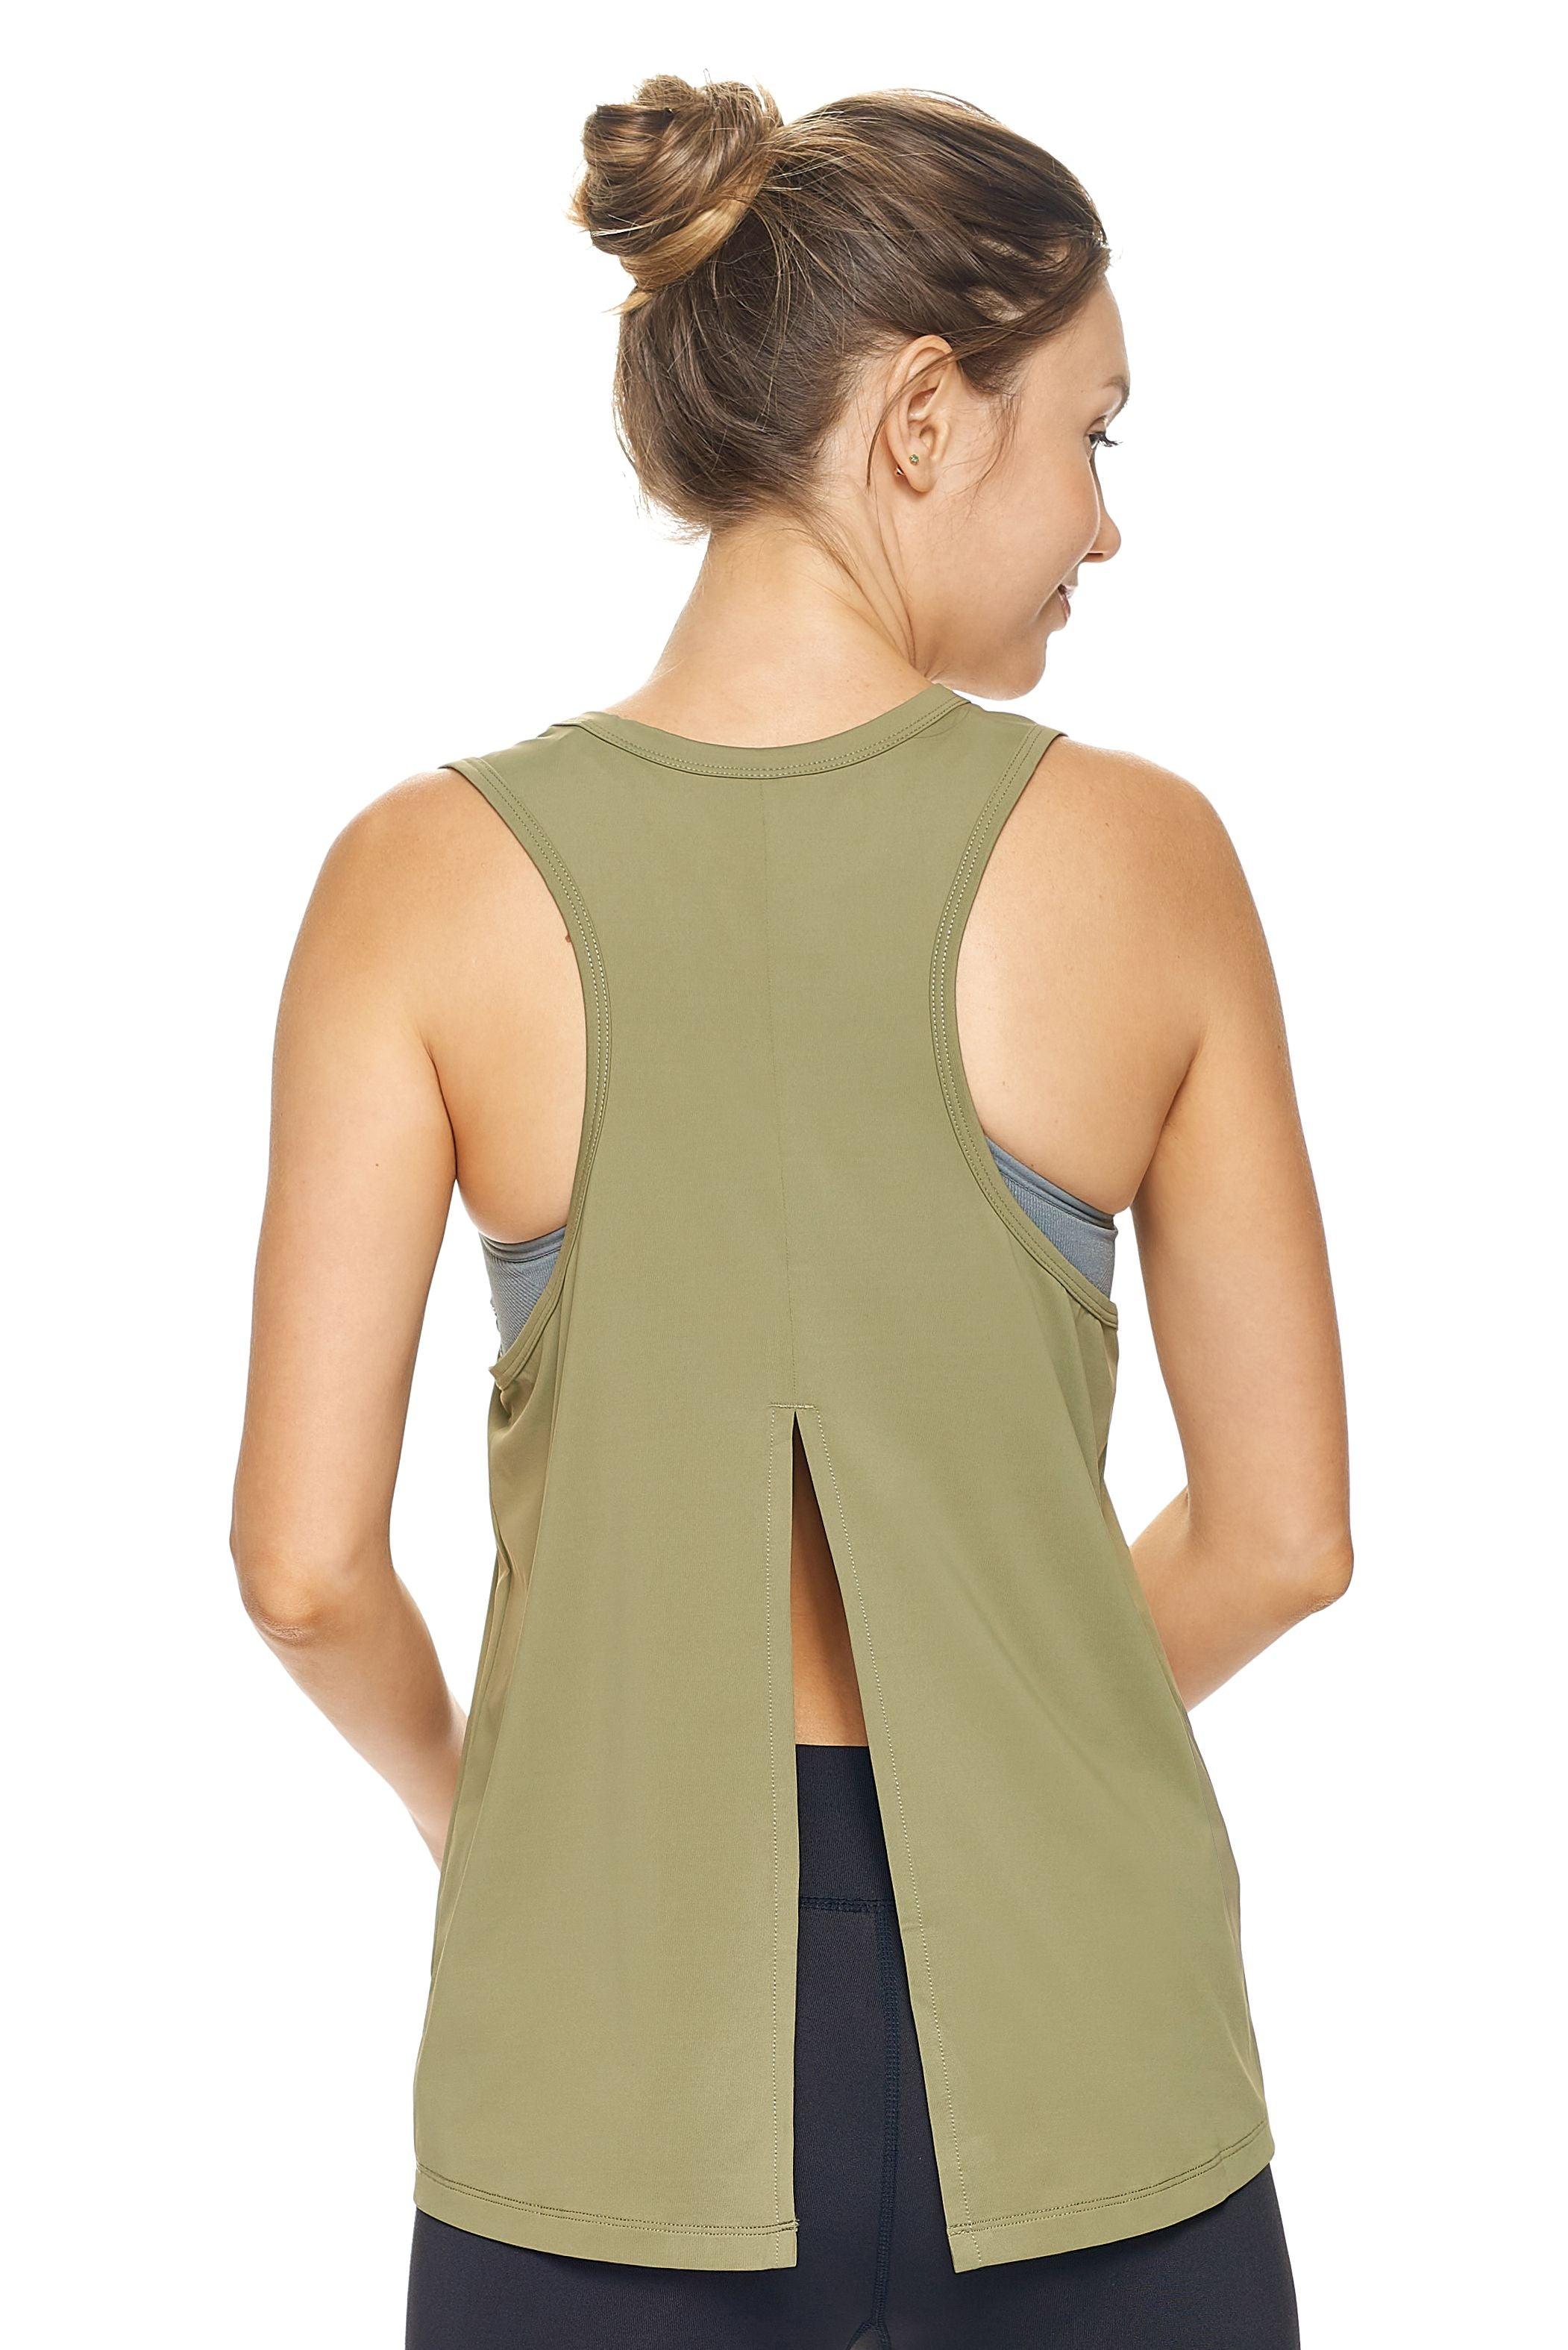 AE264 Airstretch™ Lite Tie Back Tank - Expert Brand #OLIVE GREEN